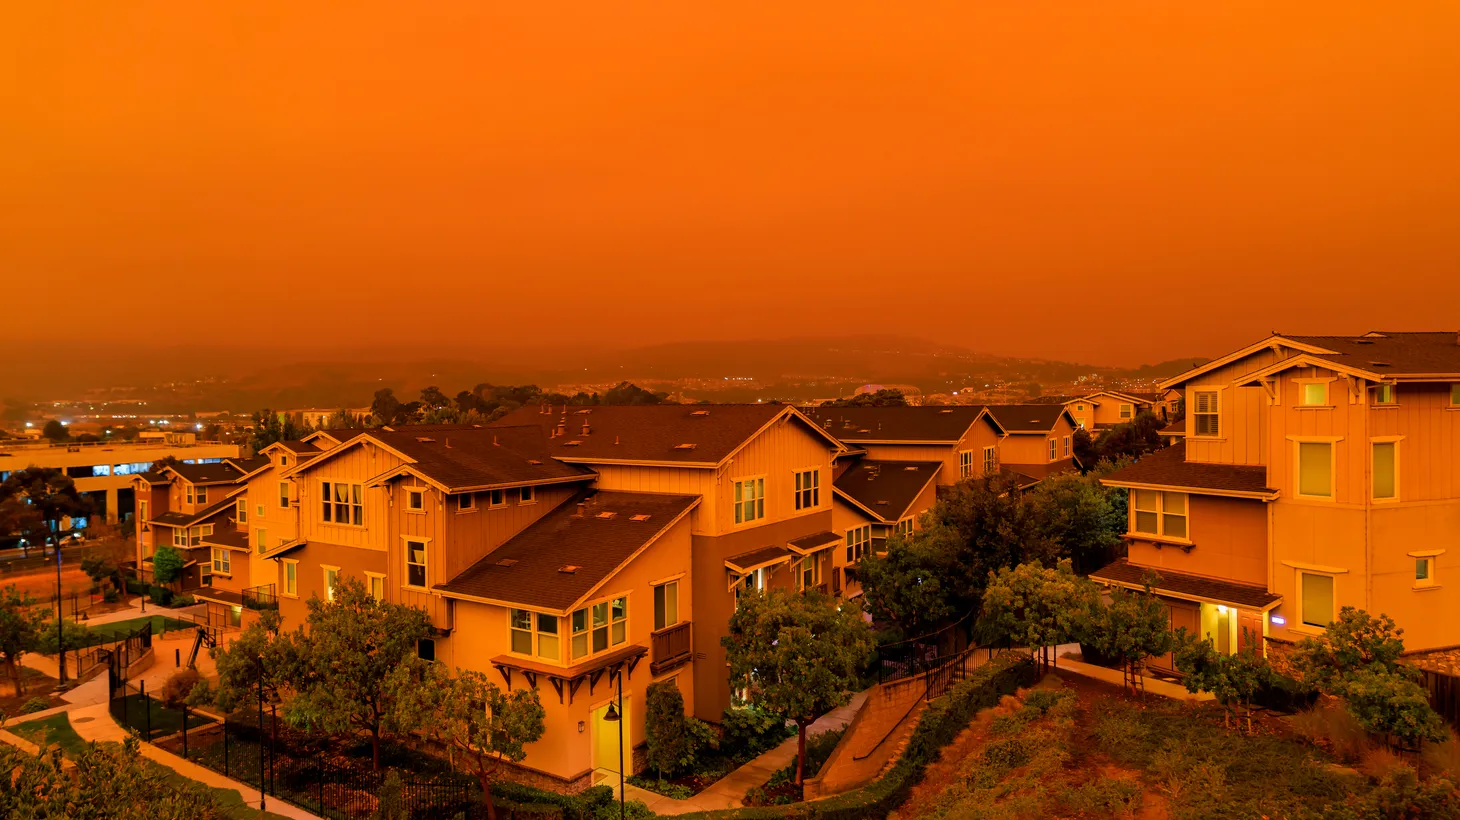 A thick orange haze of ash and smoke — from record wildfires in California — covers a neighborhood in San Francisco on September 9, 2020.